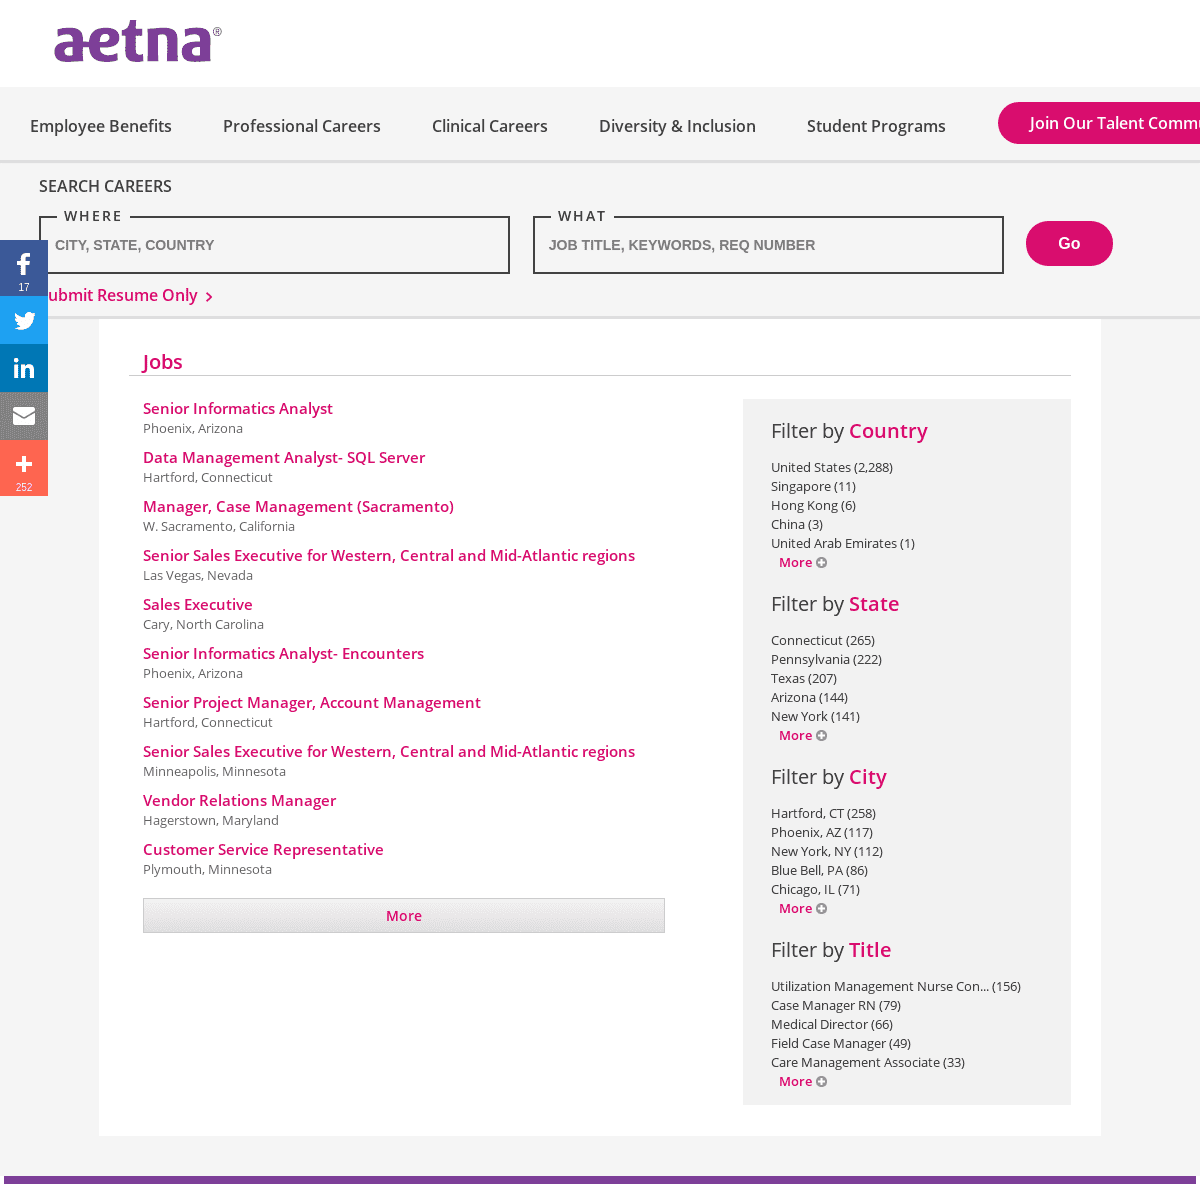 A complete backup of aetna.jobs